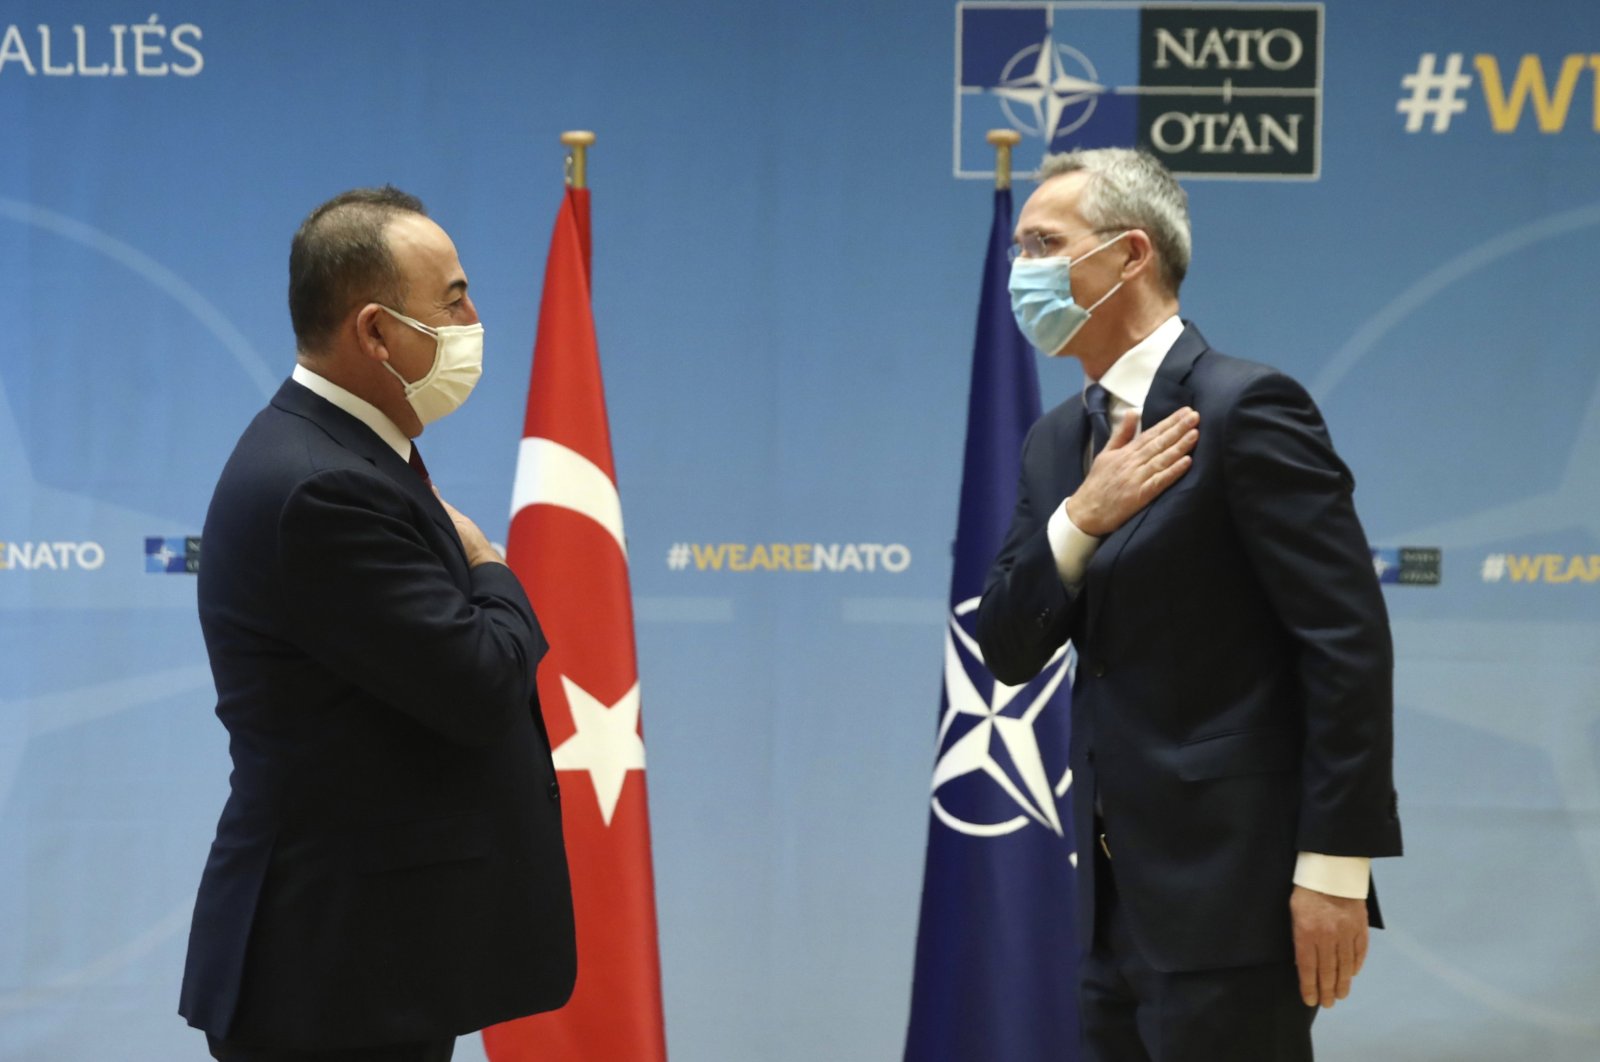 Turkey&#039;s Foreign Minister Mevlut Cavusoglu (L) and NATO Secretary-General Jens Stoltenberg greet each other prior to their meeting, in Brussels, Belgium, Jan. 22, 2021. (Fatih Aktas/Turkish Foreign Ministry via AP, Pool)